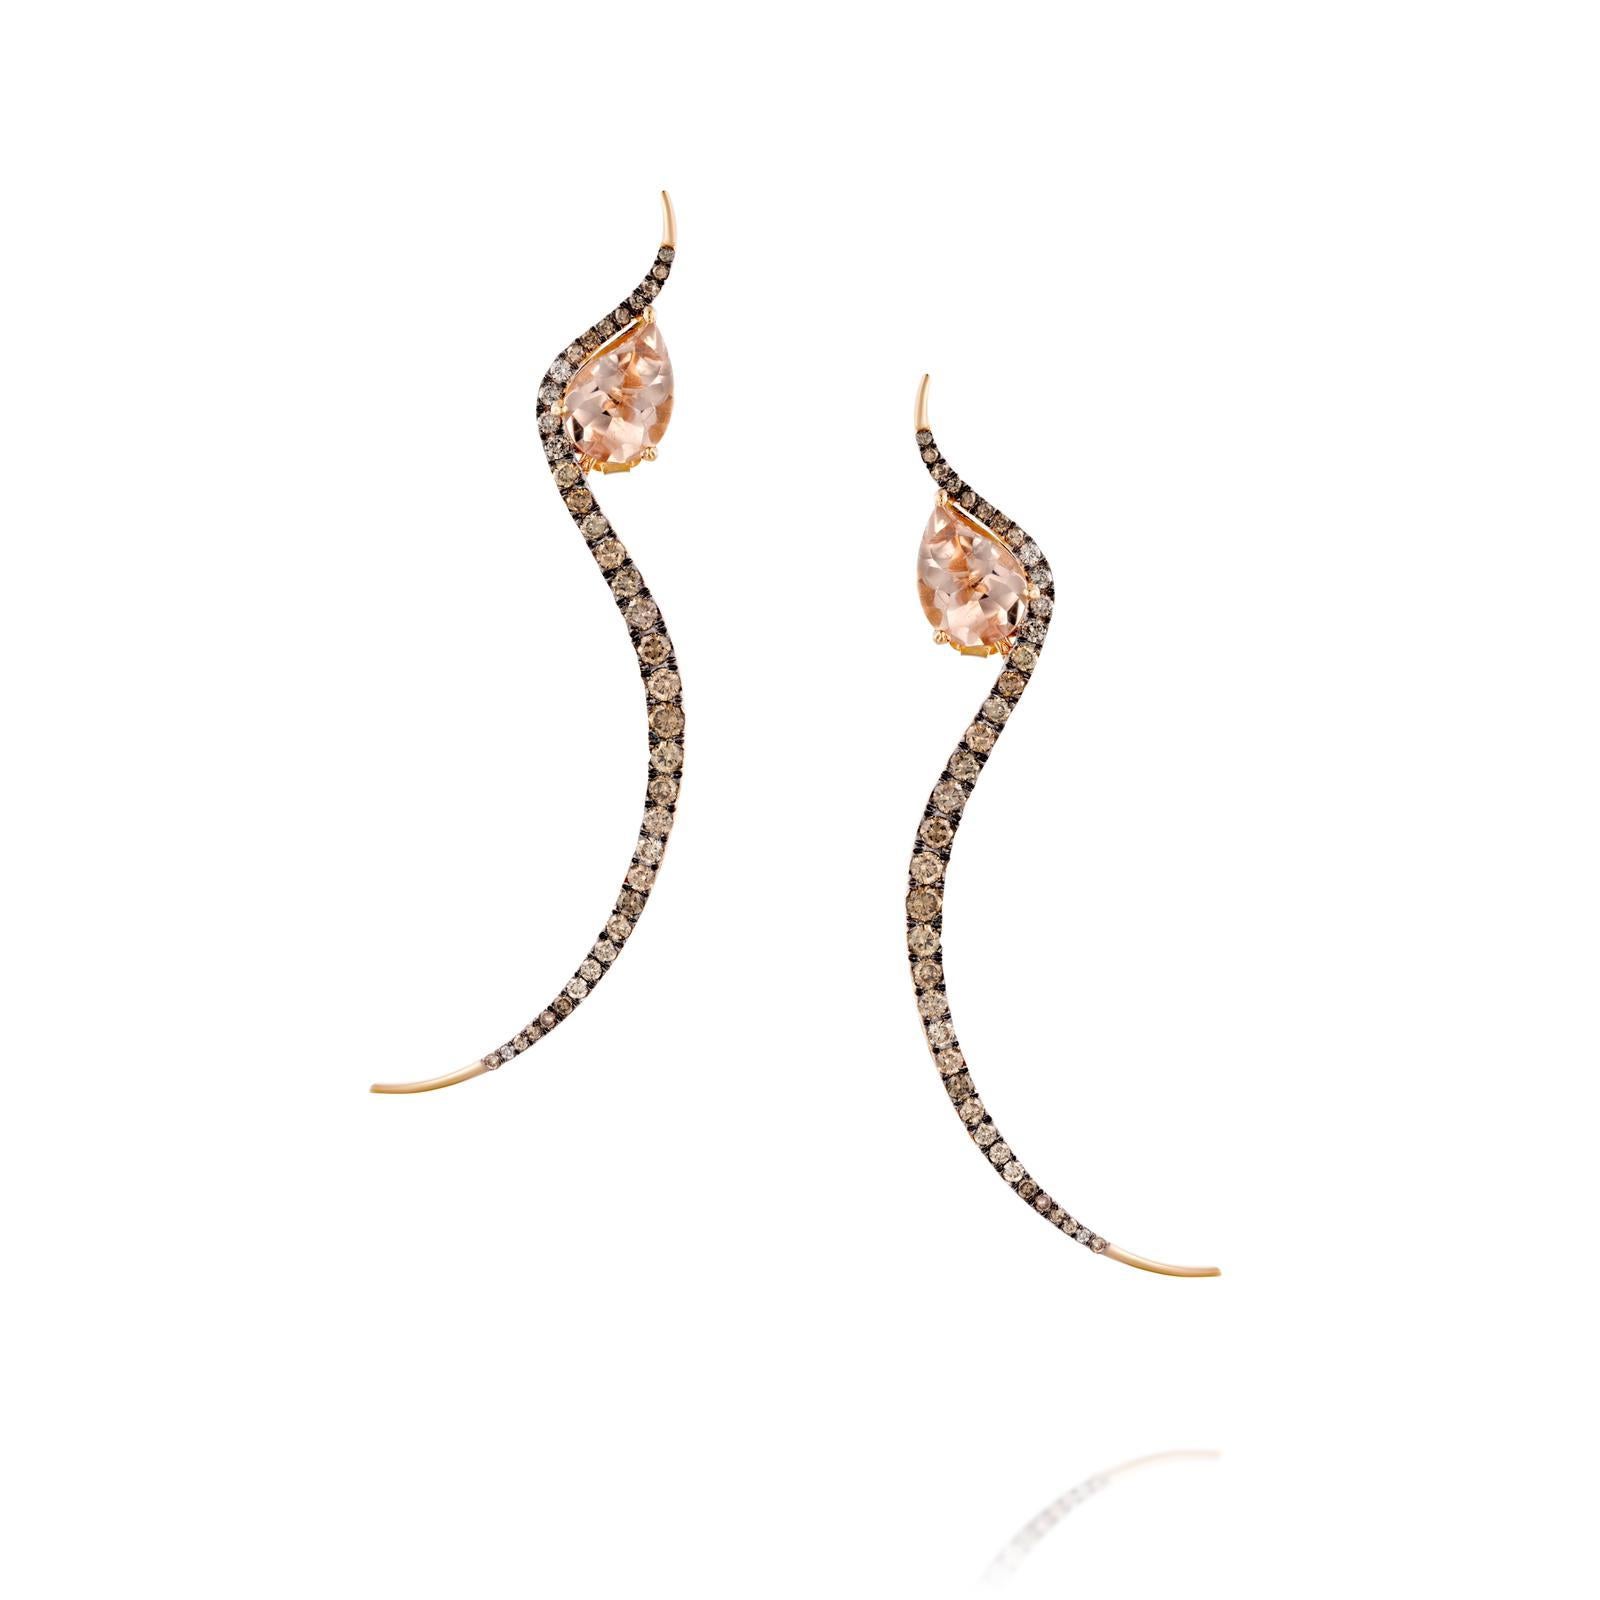 Bochic Morganite and Diamond Willow Earrings. 
This earrings are beautiful, chic and edgy at the same time. 
The earrings are versatile and you can adjust them as you like.
Either as a drop or maybe as a runner on top ear. Can be worn both at the